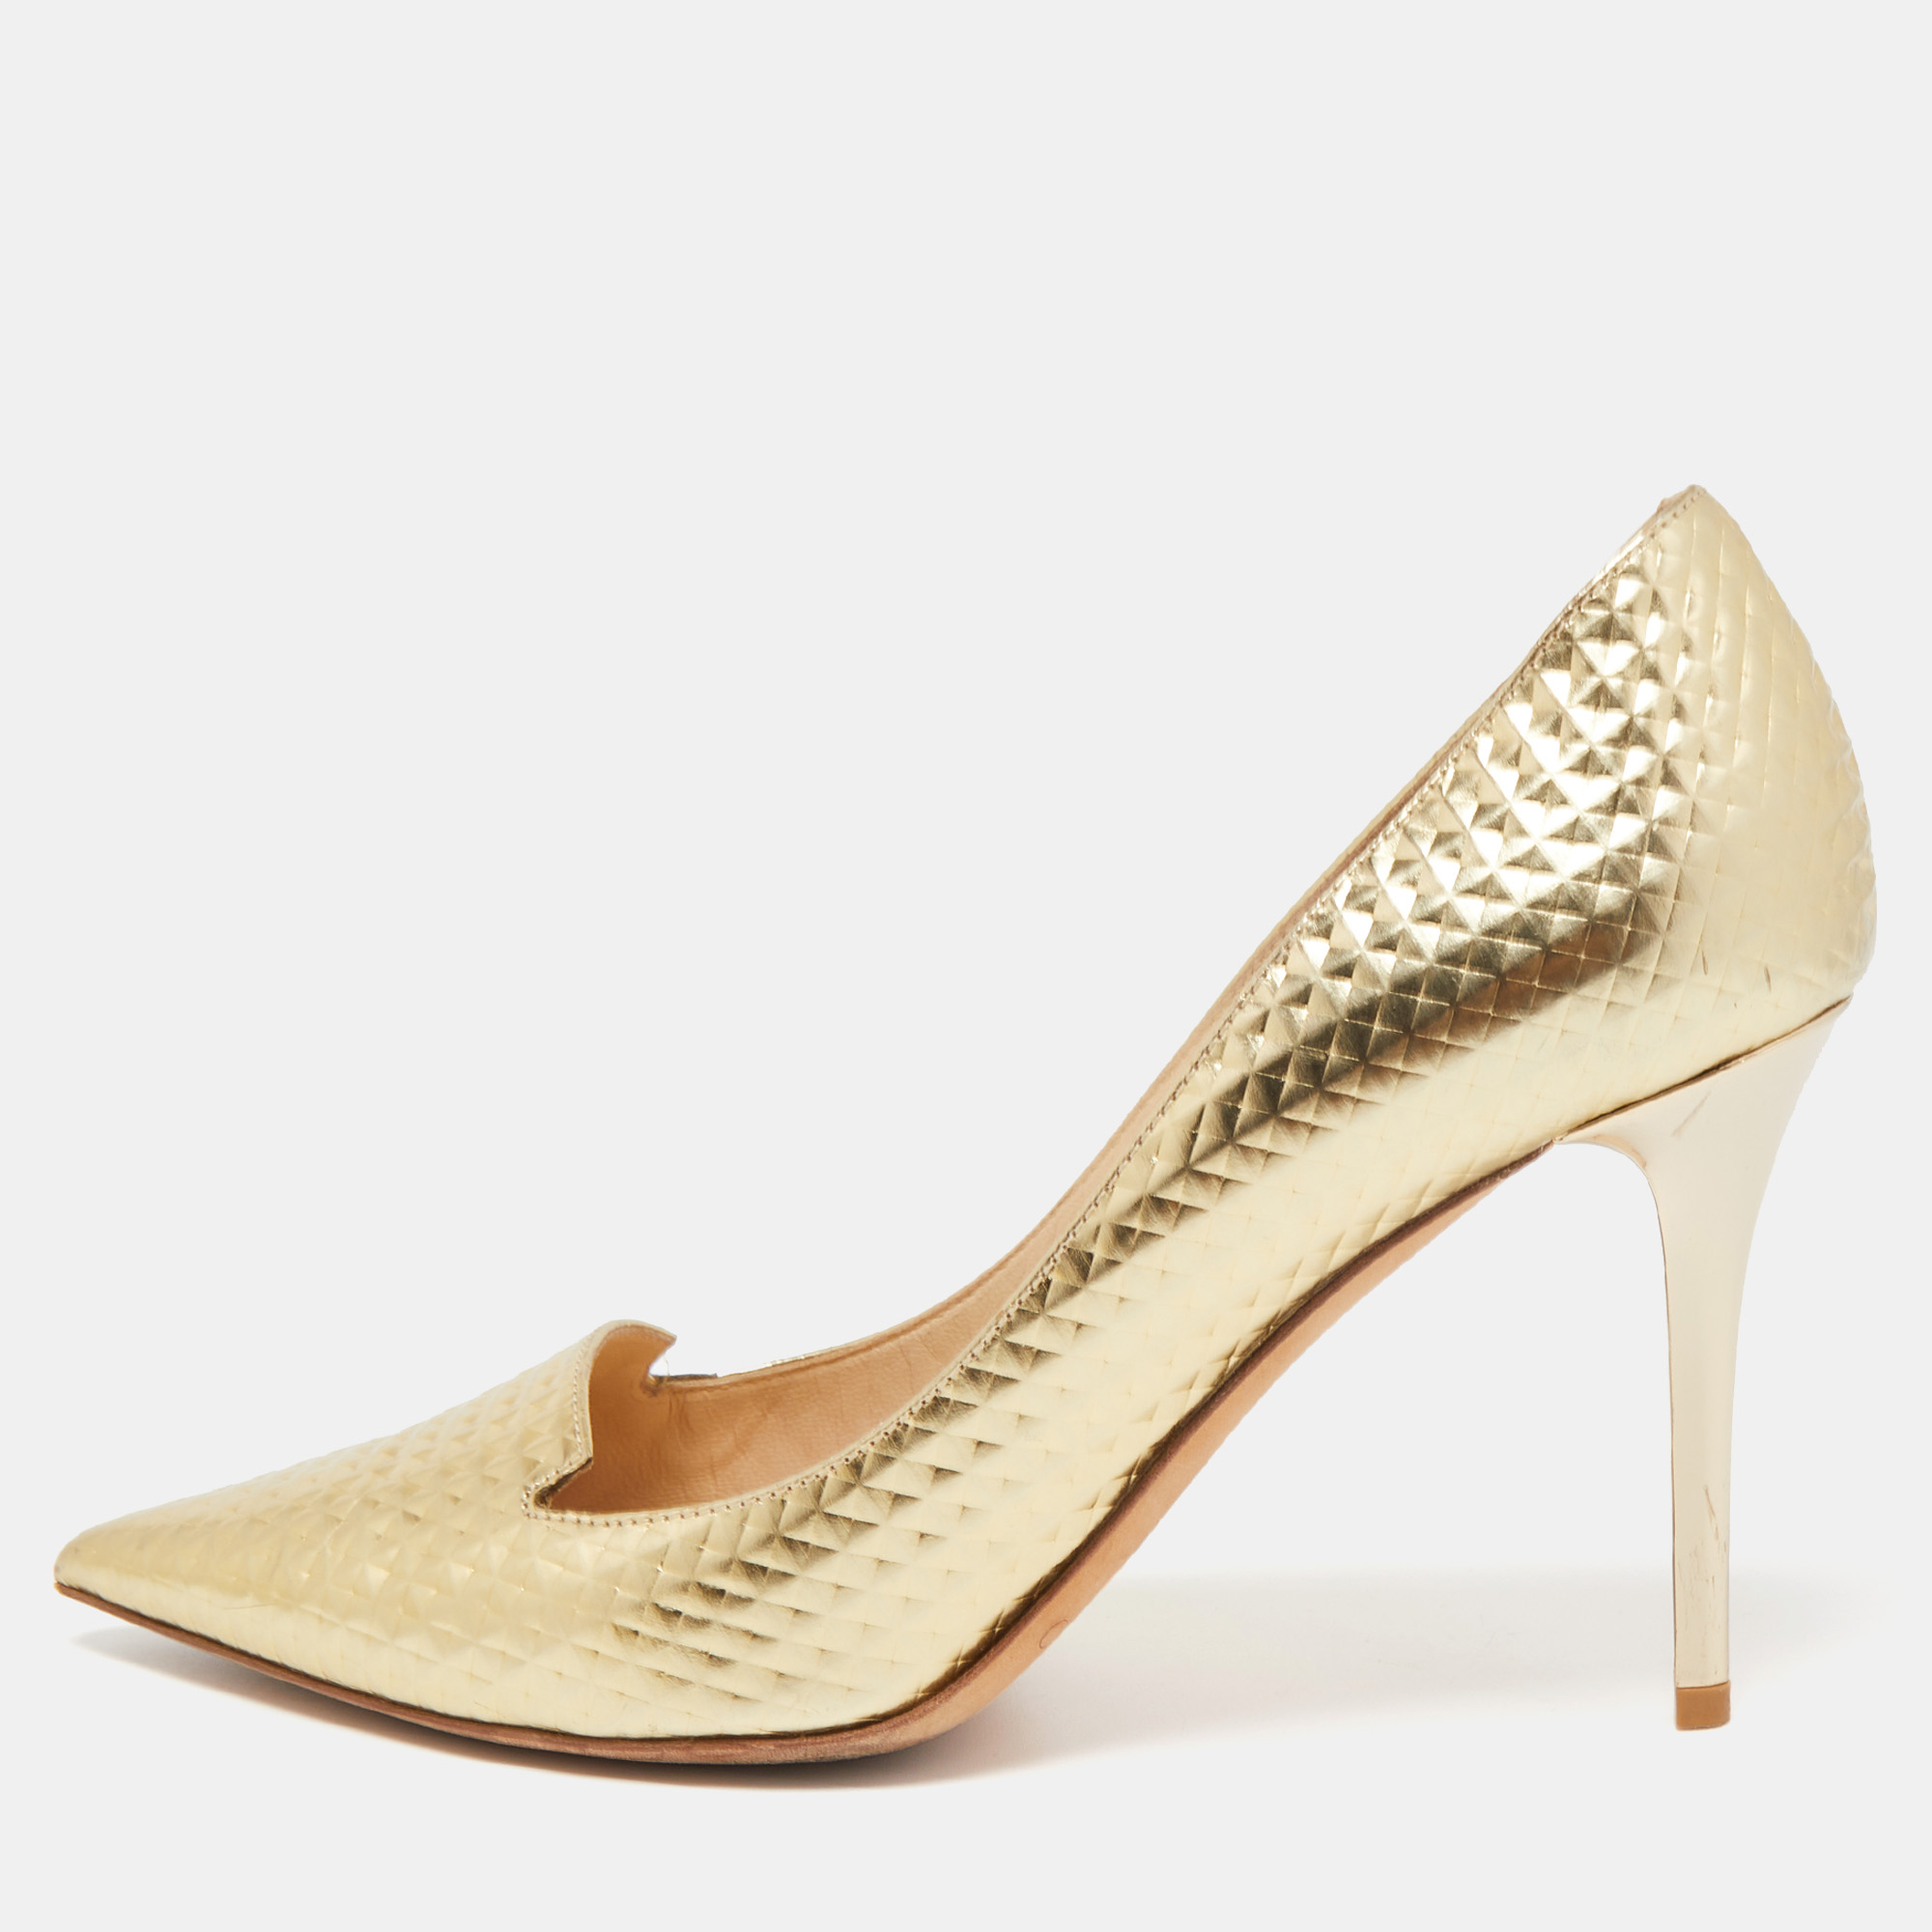 Jimmy Choo Gold Textured Leather Pointed Toe Pumps Size 37